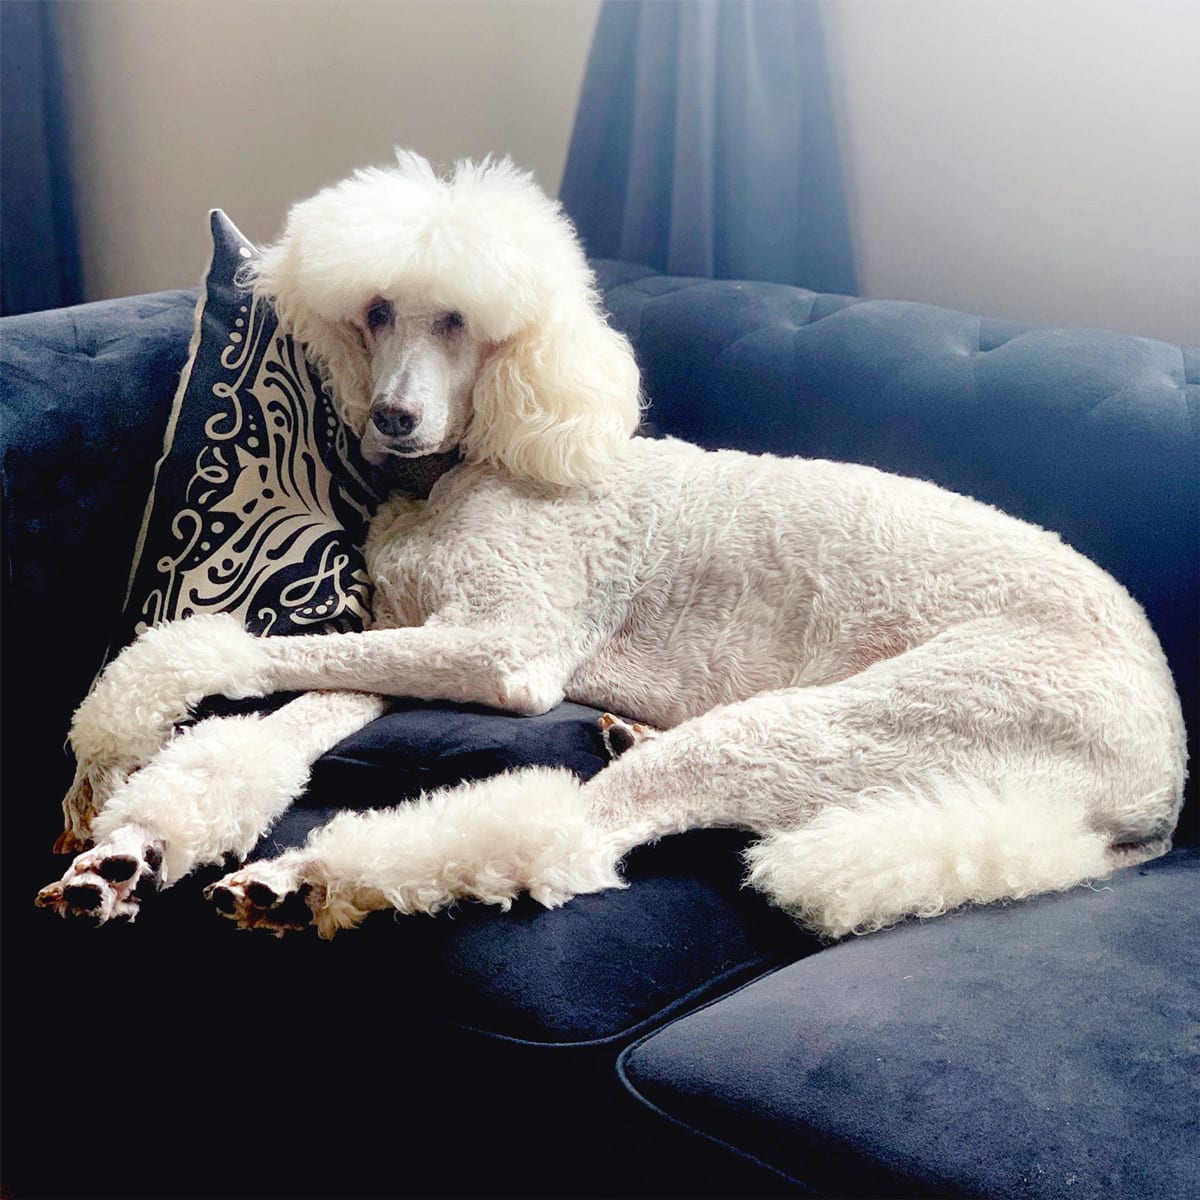 A Celebration of Phaedra the Standard Poodle